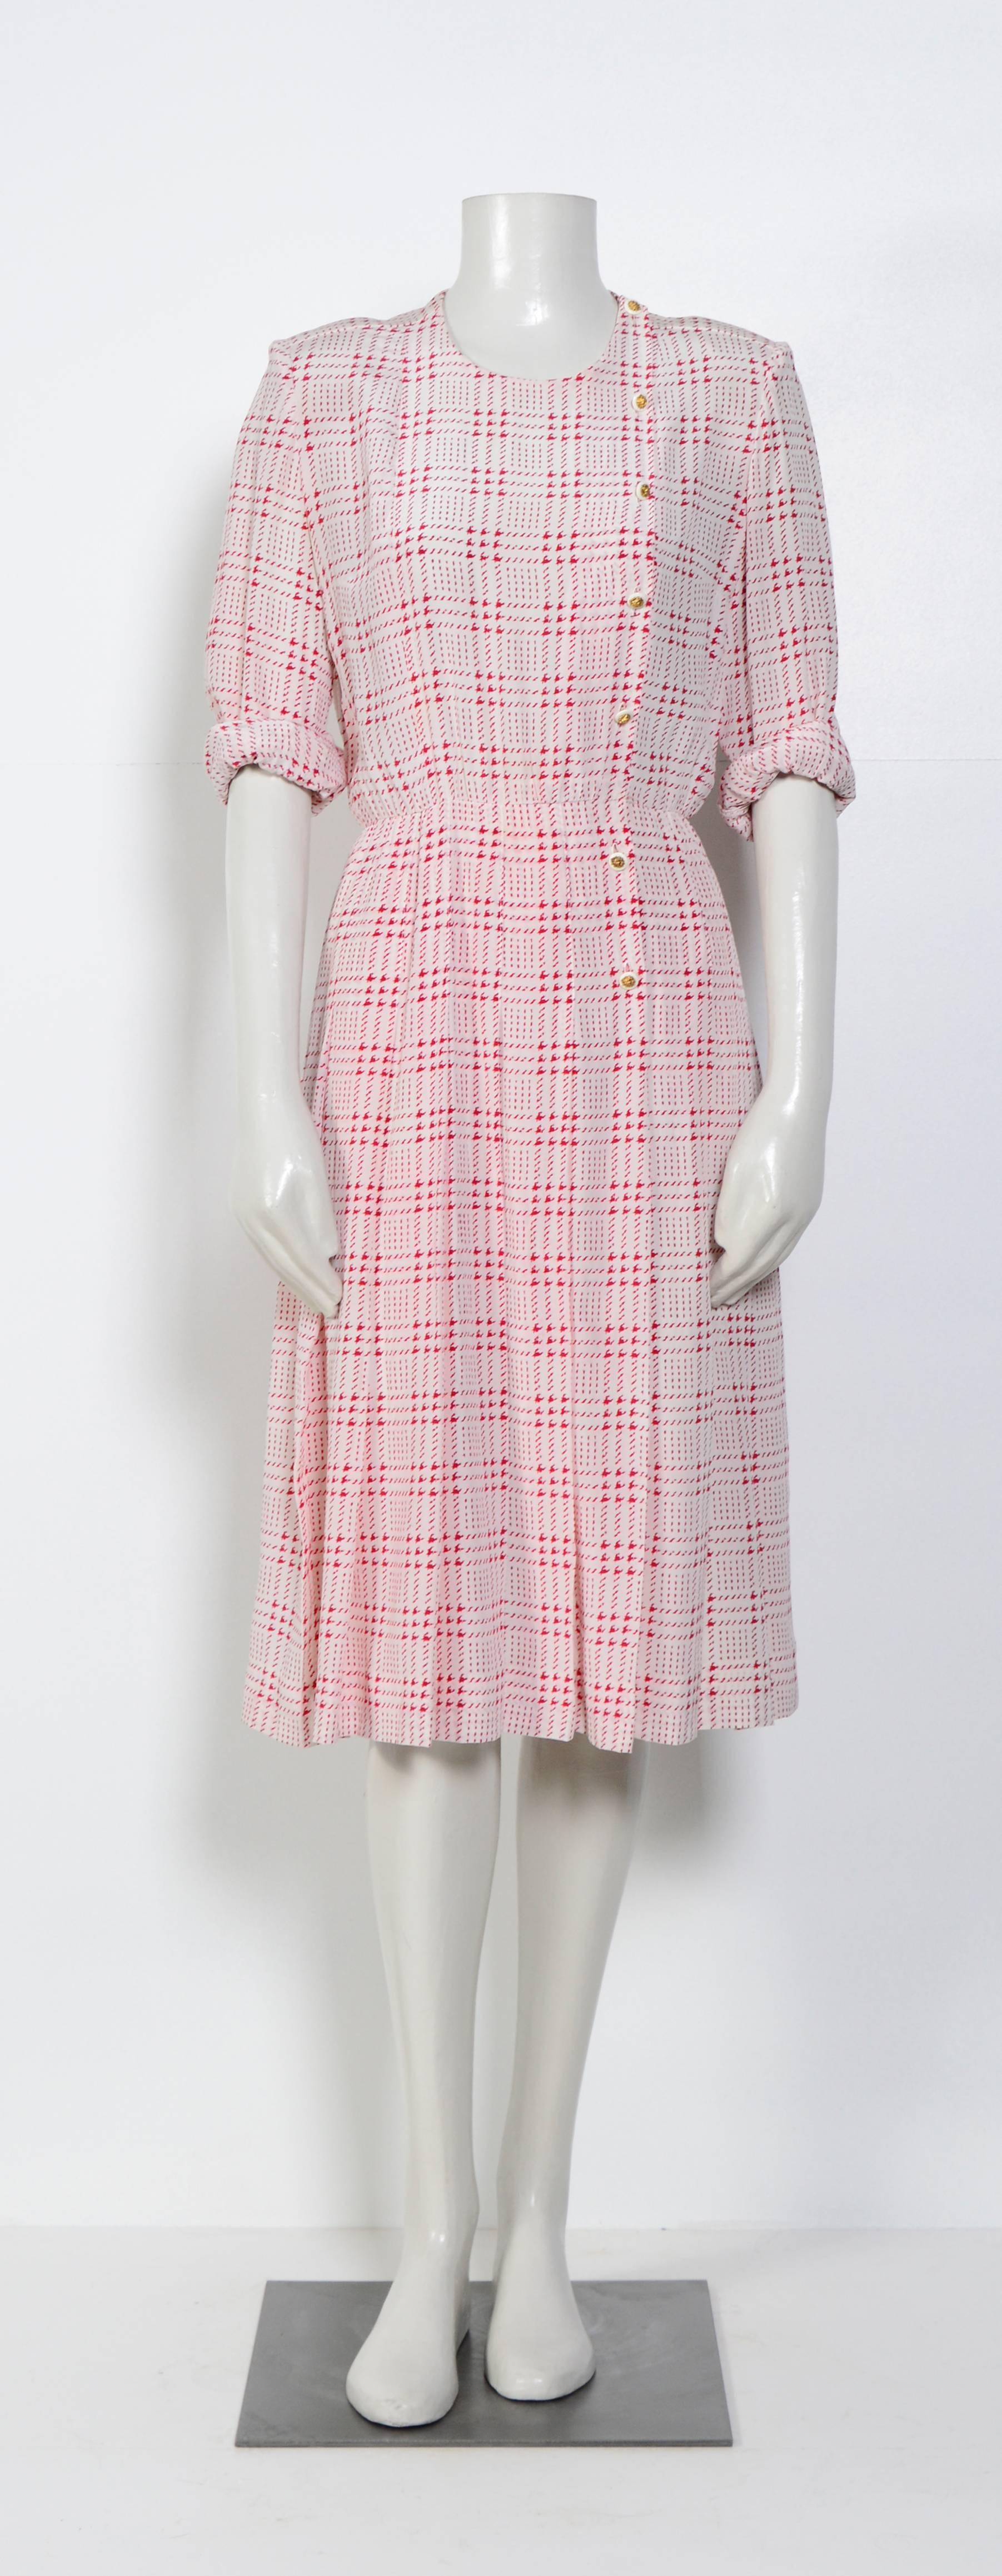 Women's Chanel vintage 1970s printed white & pink silk dress with matching scarf